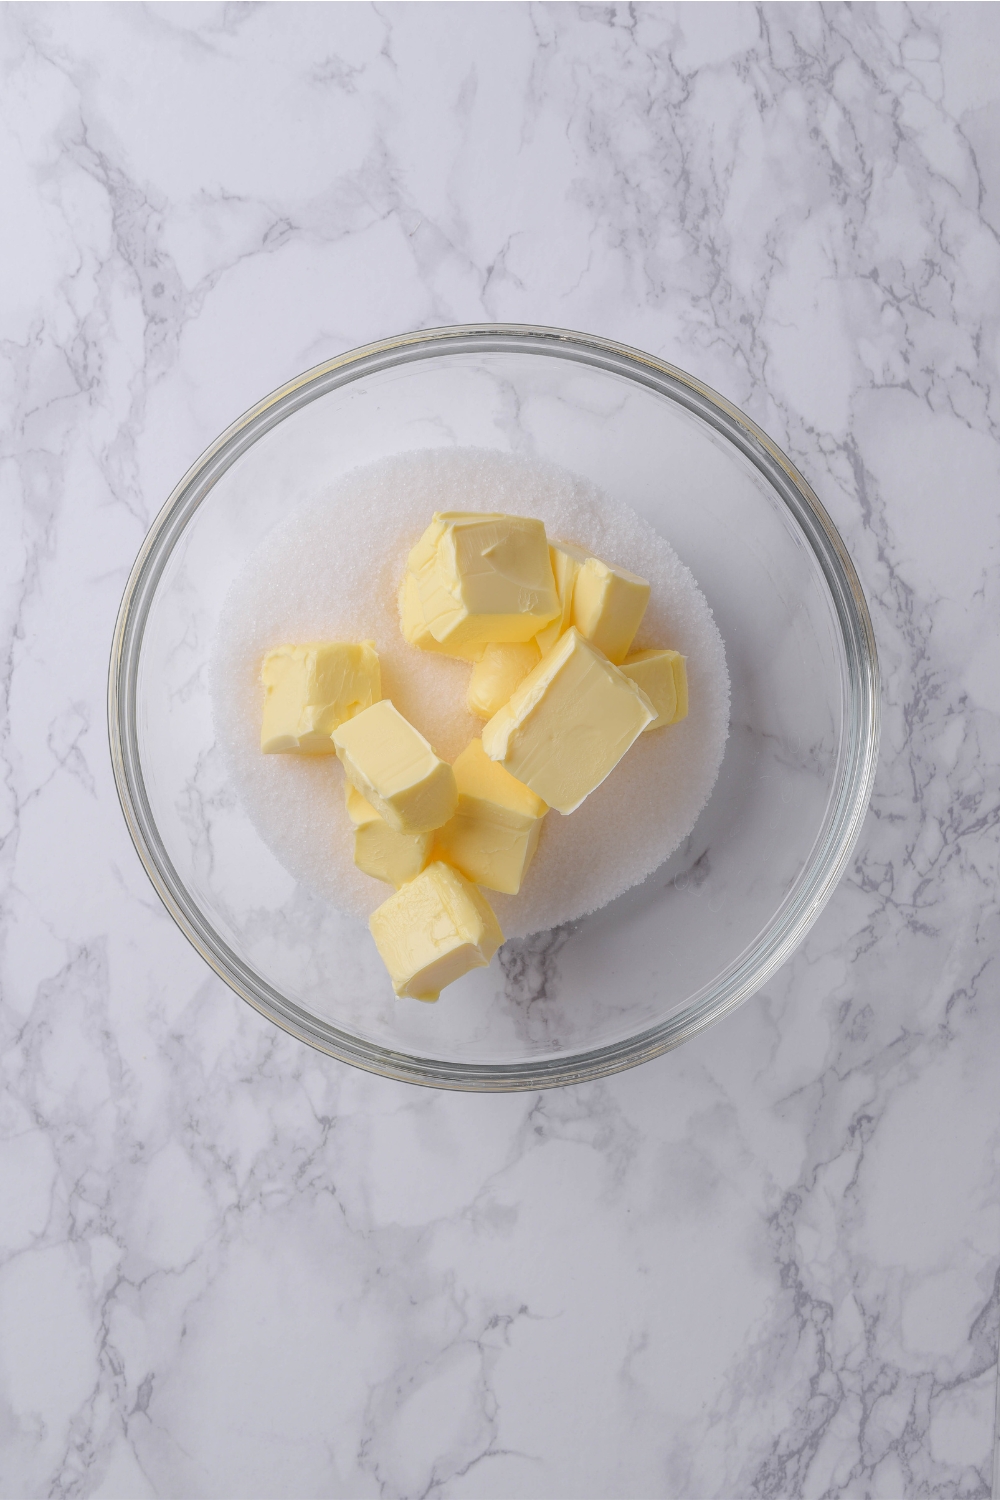 A glass bowl holds cubed butter and white granulated sugar.